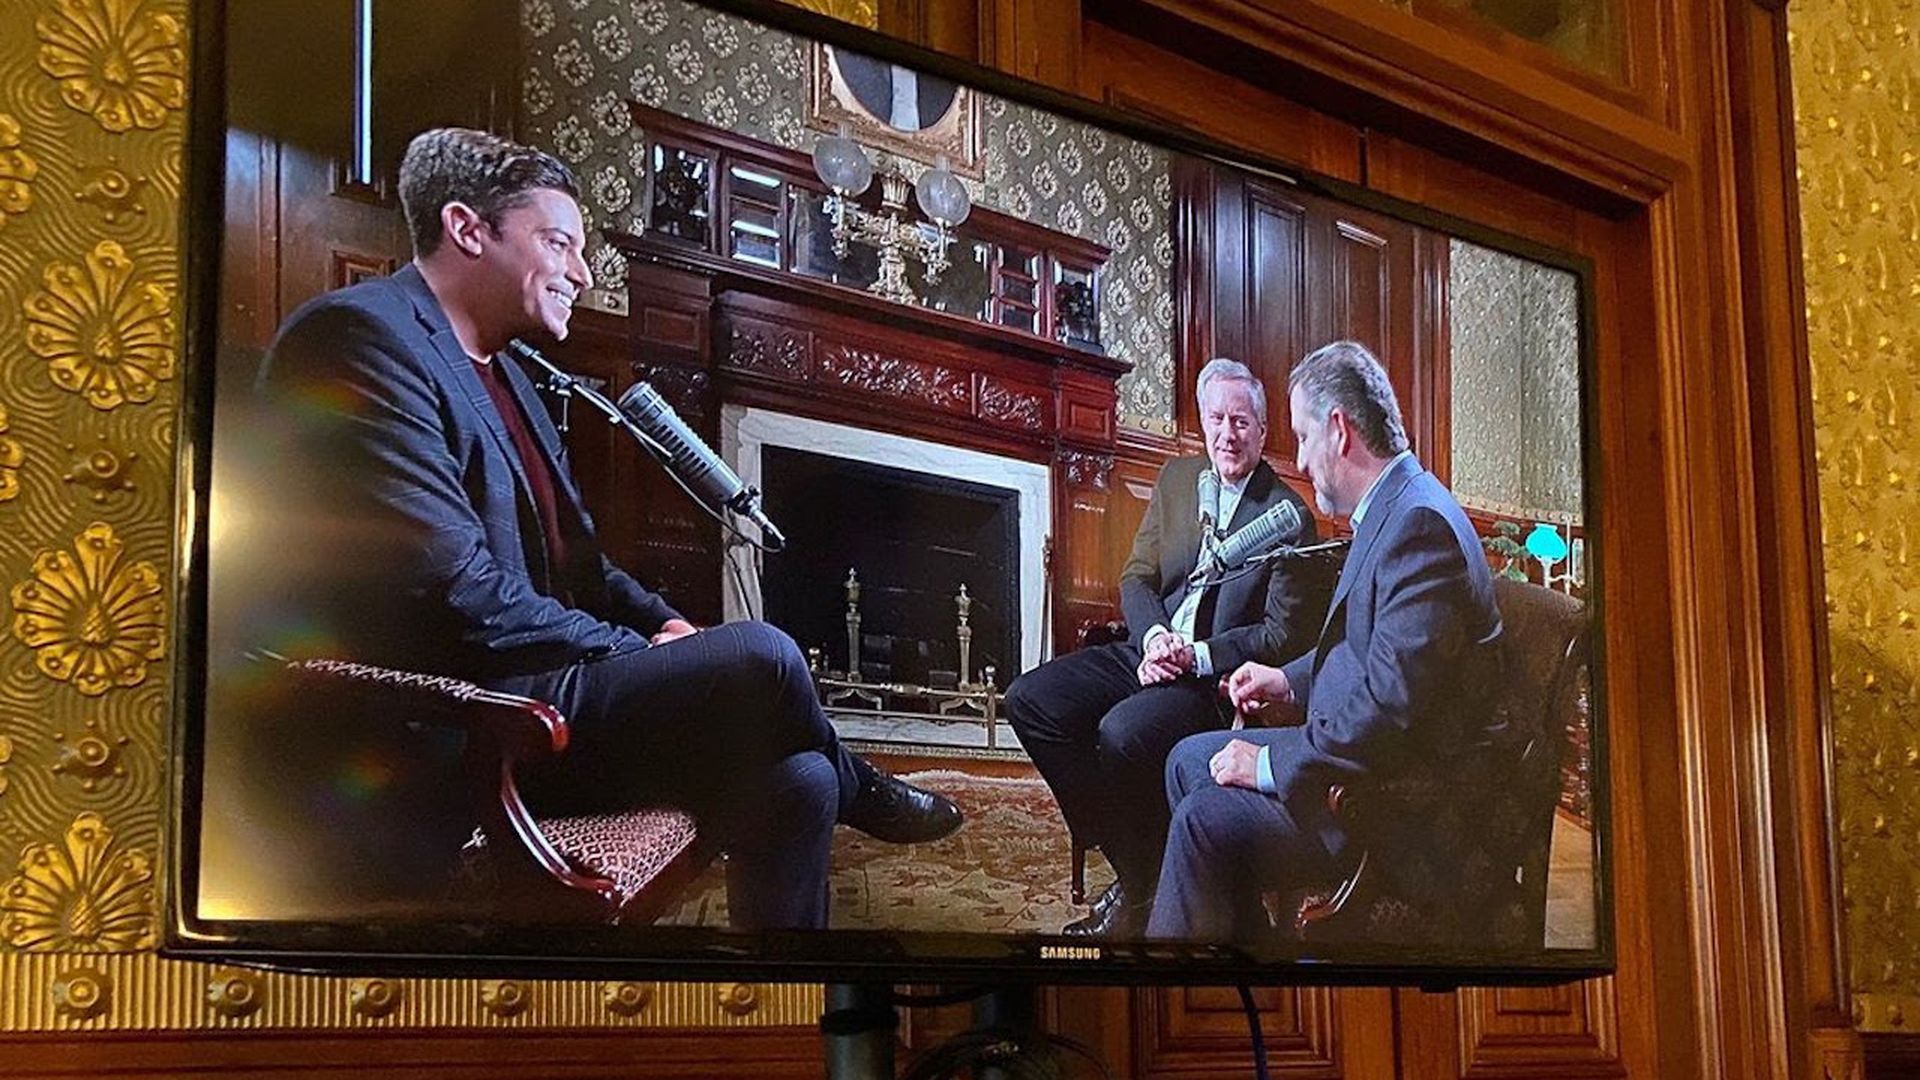 A monitor shows Ted Cruz interviewing Mark Meadows